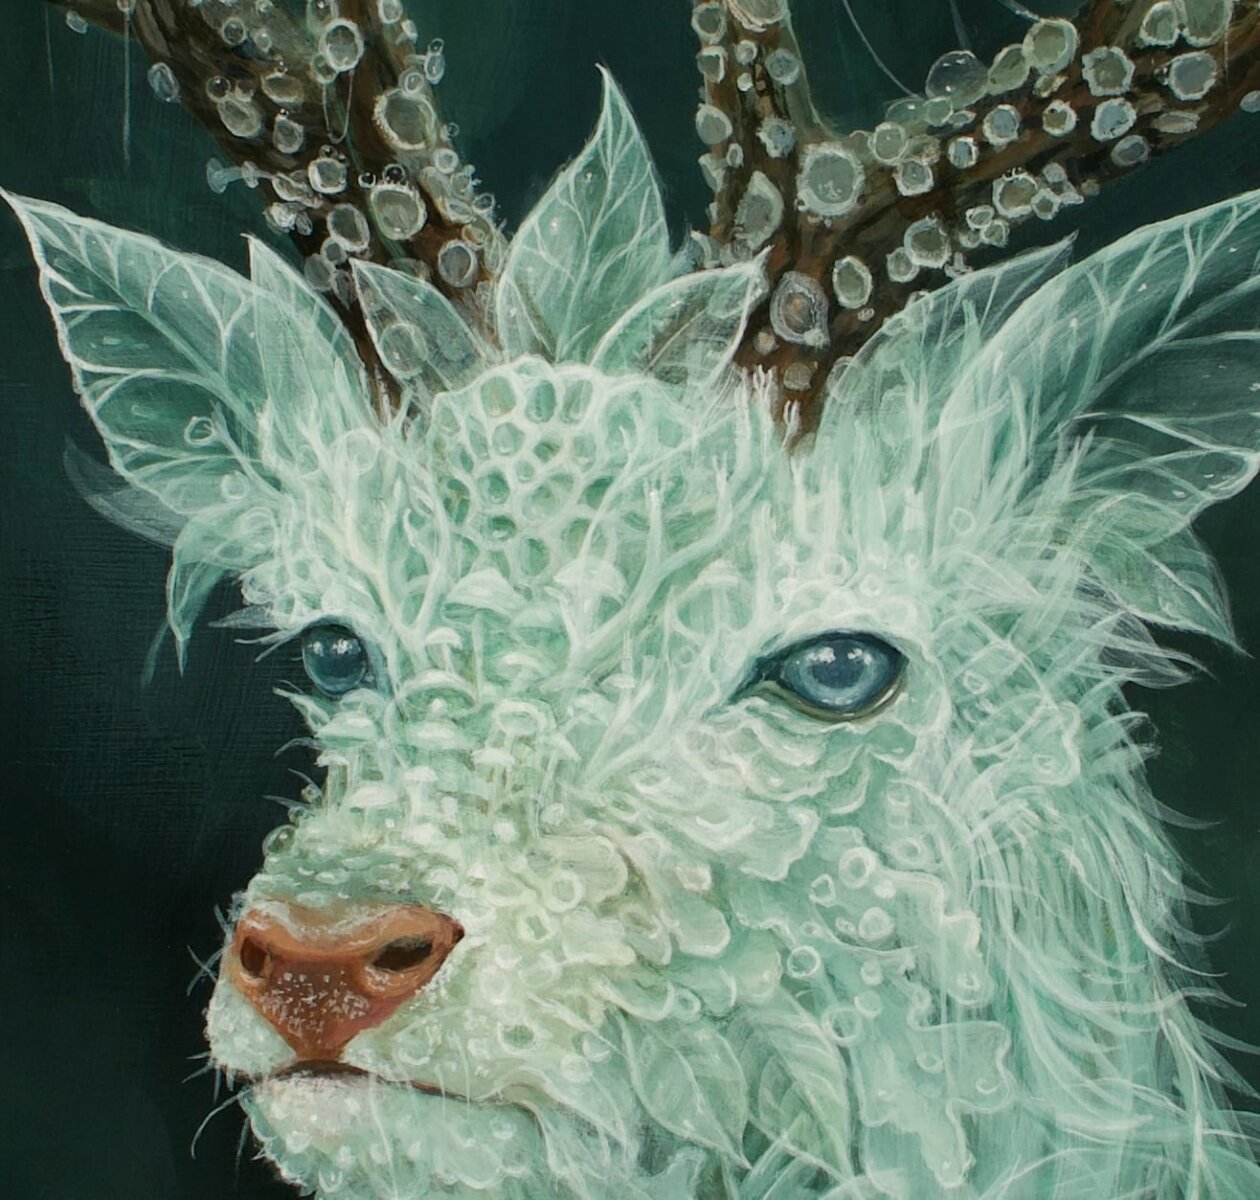 Surrealistic Portrait Paintings Of Animals Composed Of Translucent Botanics By Molly Devlin (1)